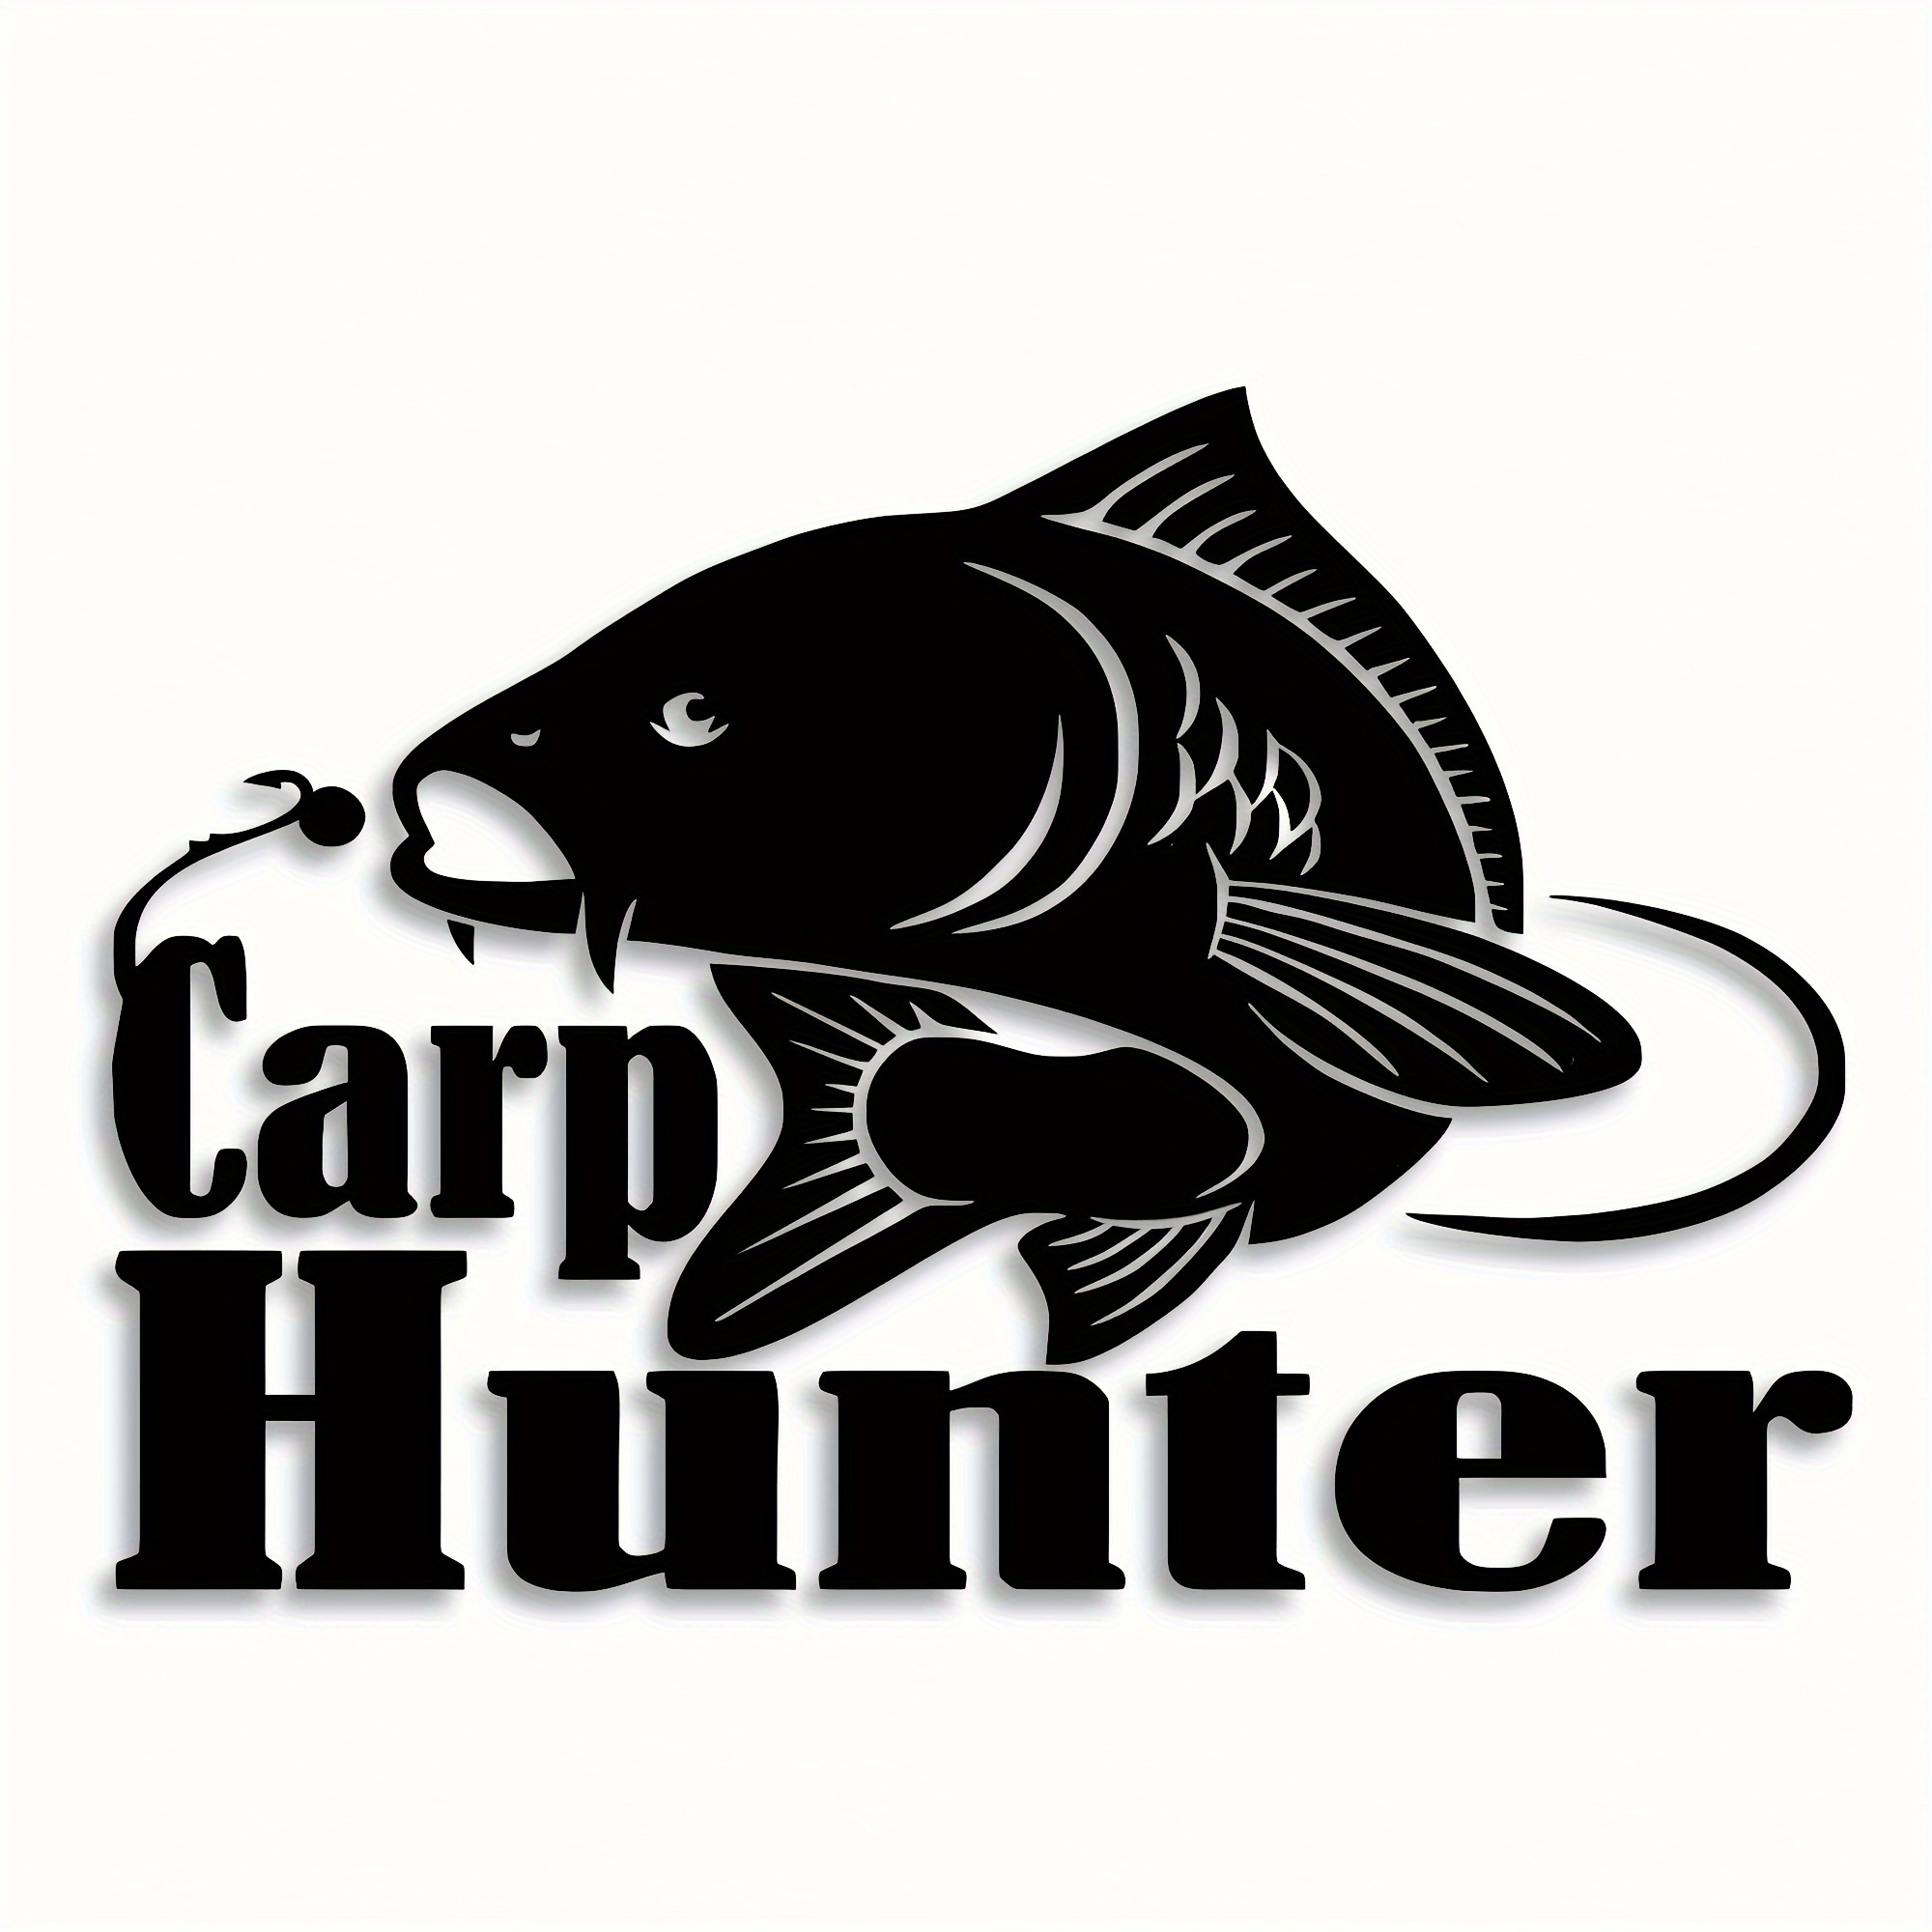 Interesting Stickers Fishing Enthusiasts Carp Hunter Decorative Stickers  Car Stickers